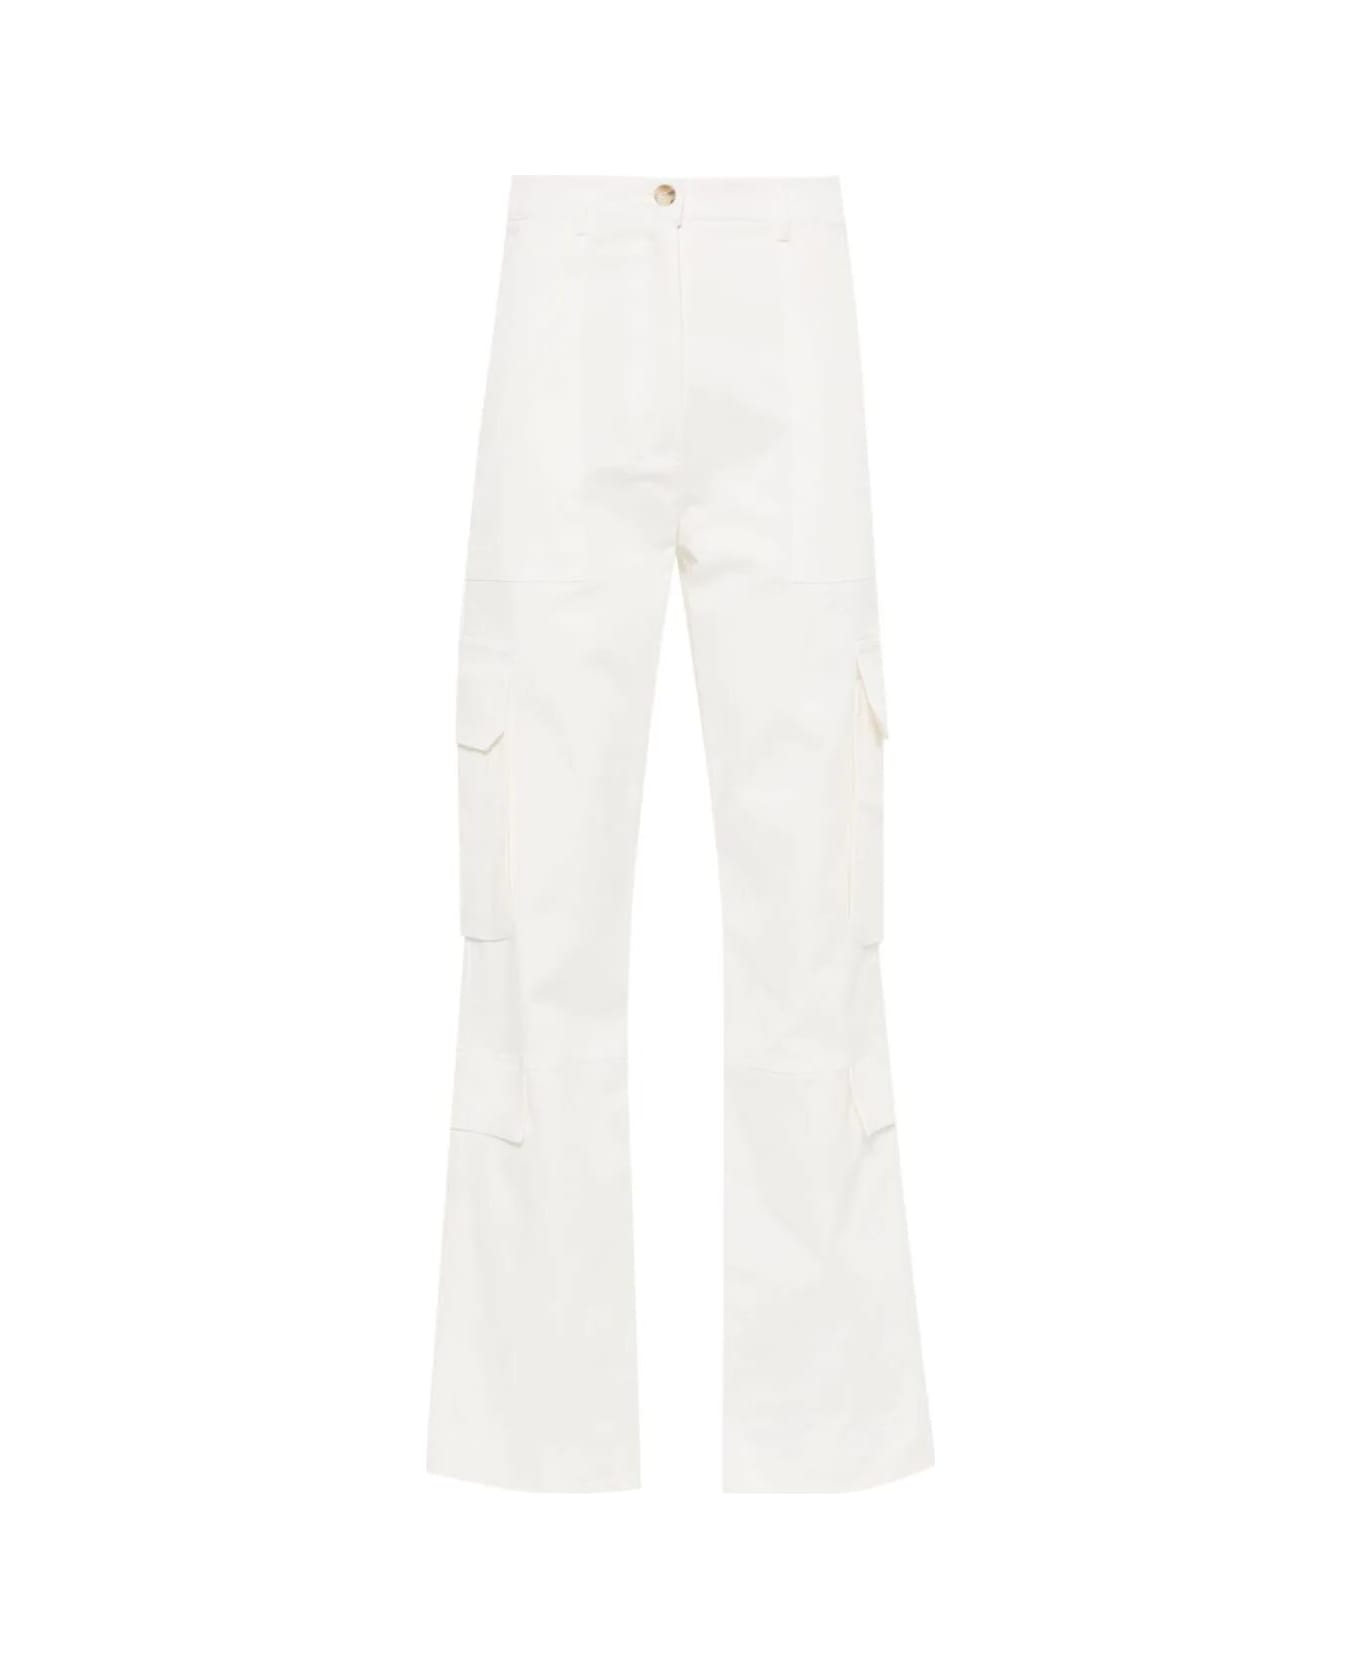 Drhope Cargo Pants - White